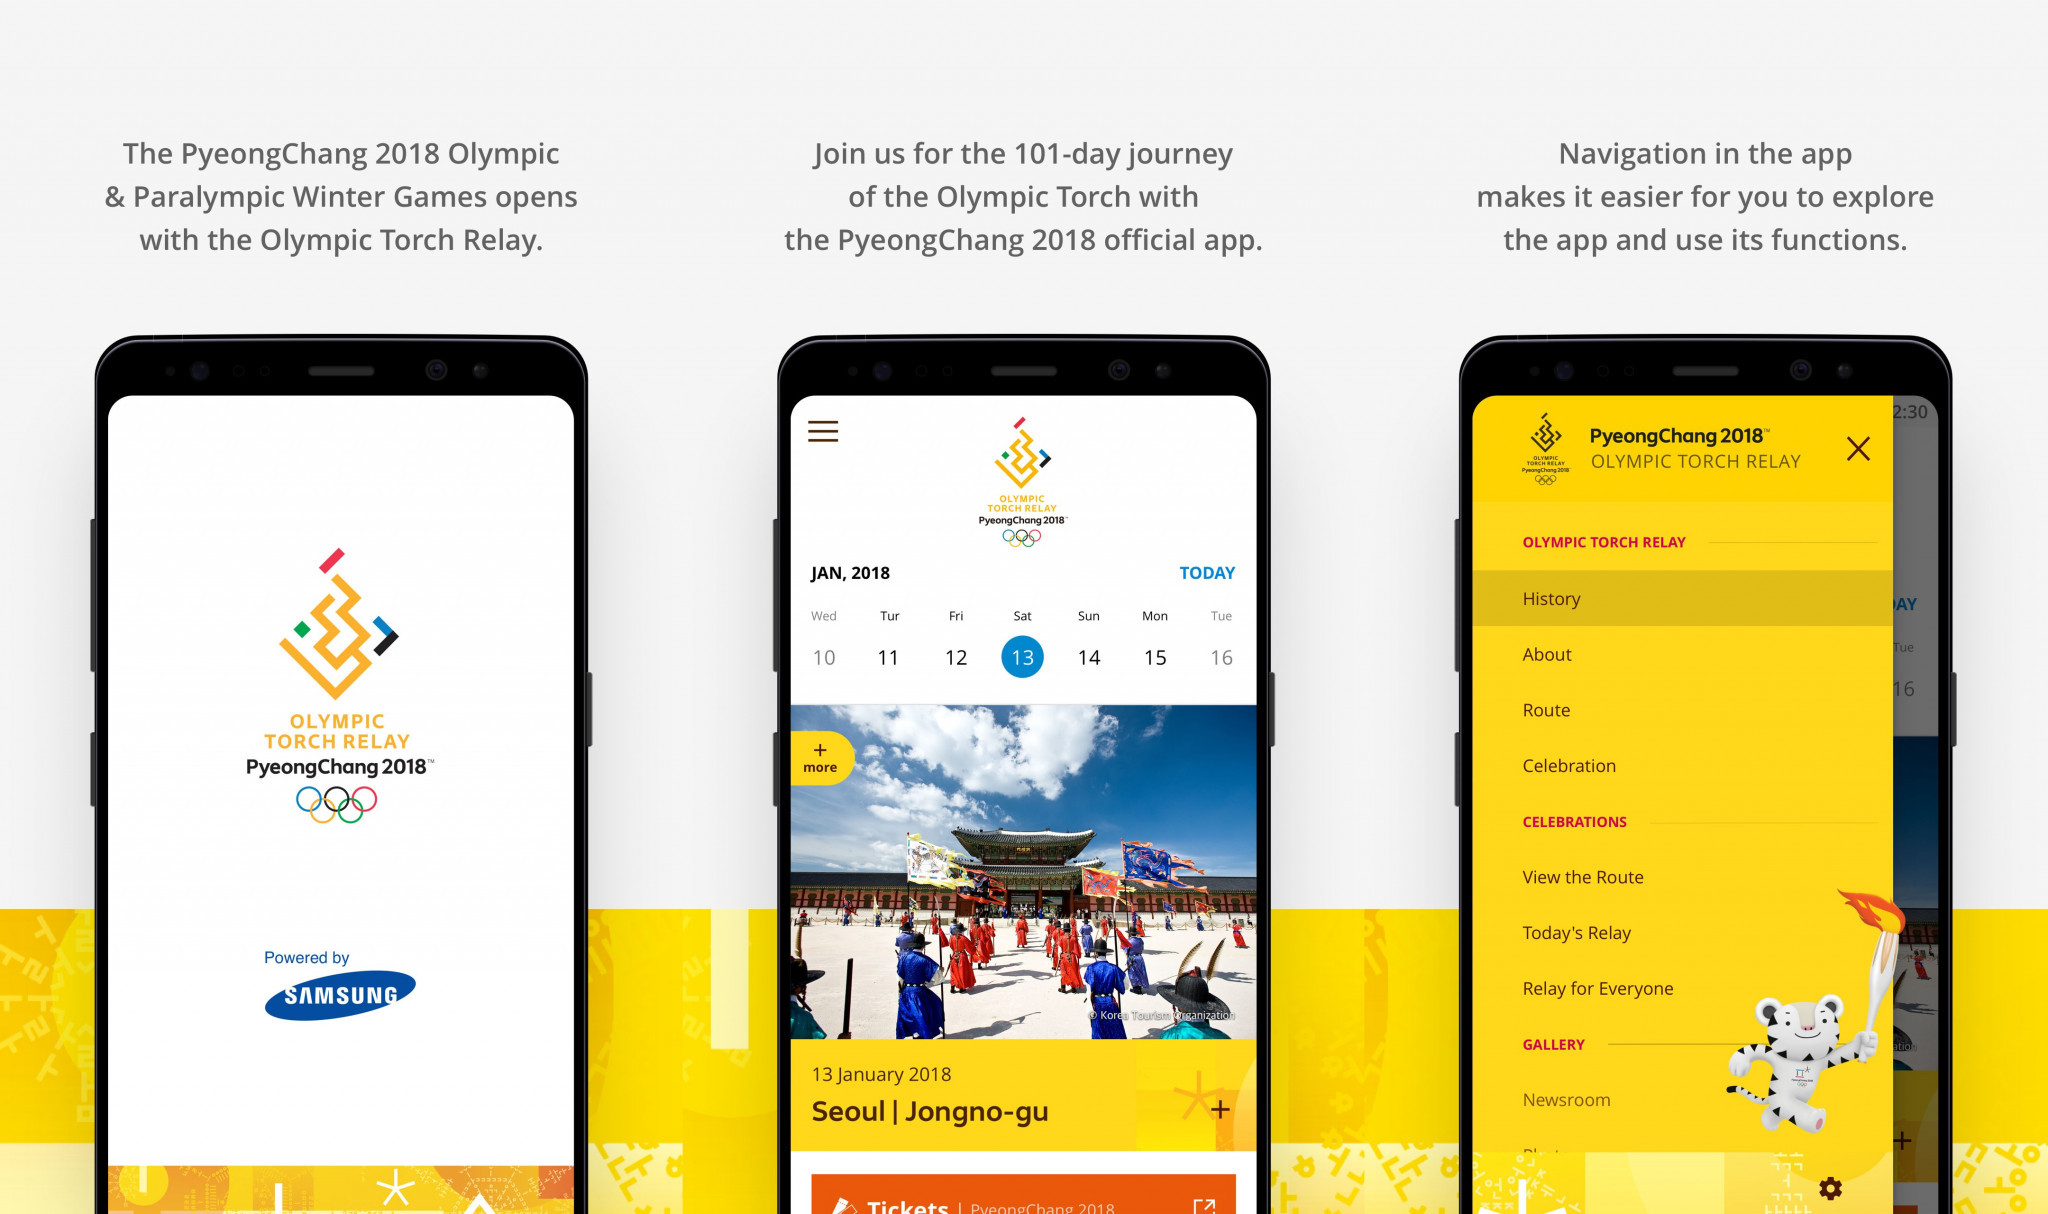 Pyeongchang 2018 launches official app